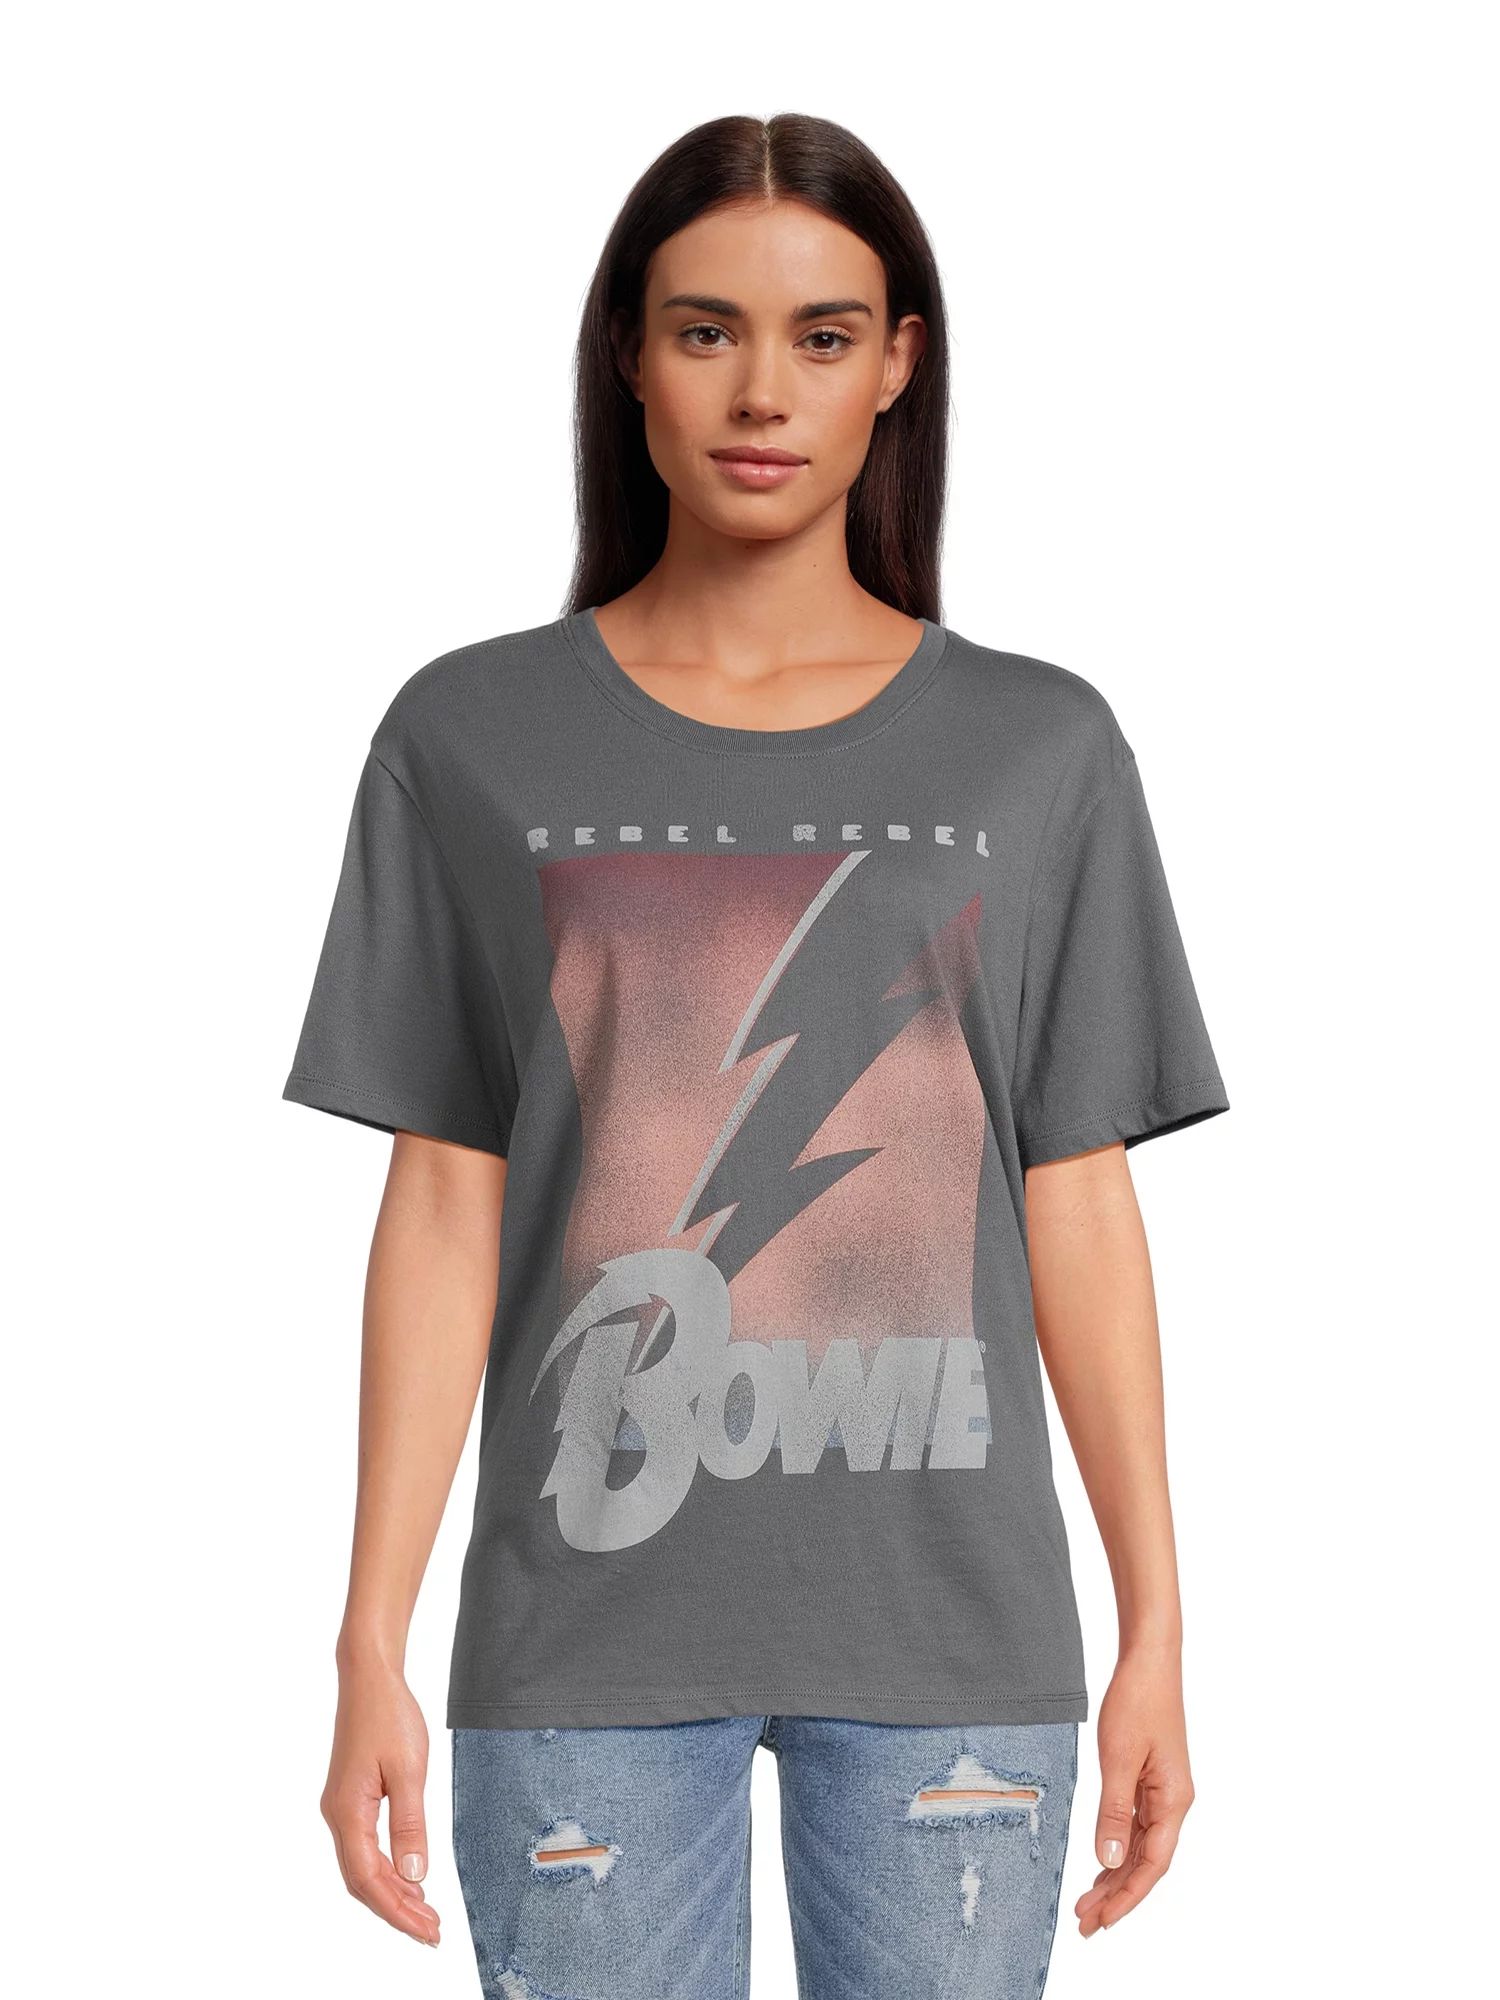 Time and Tru Women's David Bowie Graphic Tee with Short Sleeves, Sizes S-3XL | Walmart (US)